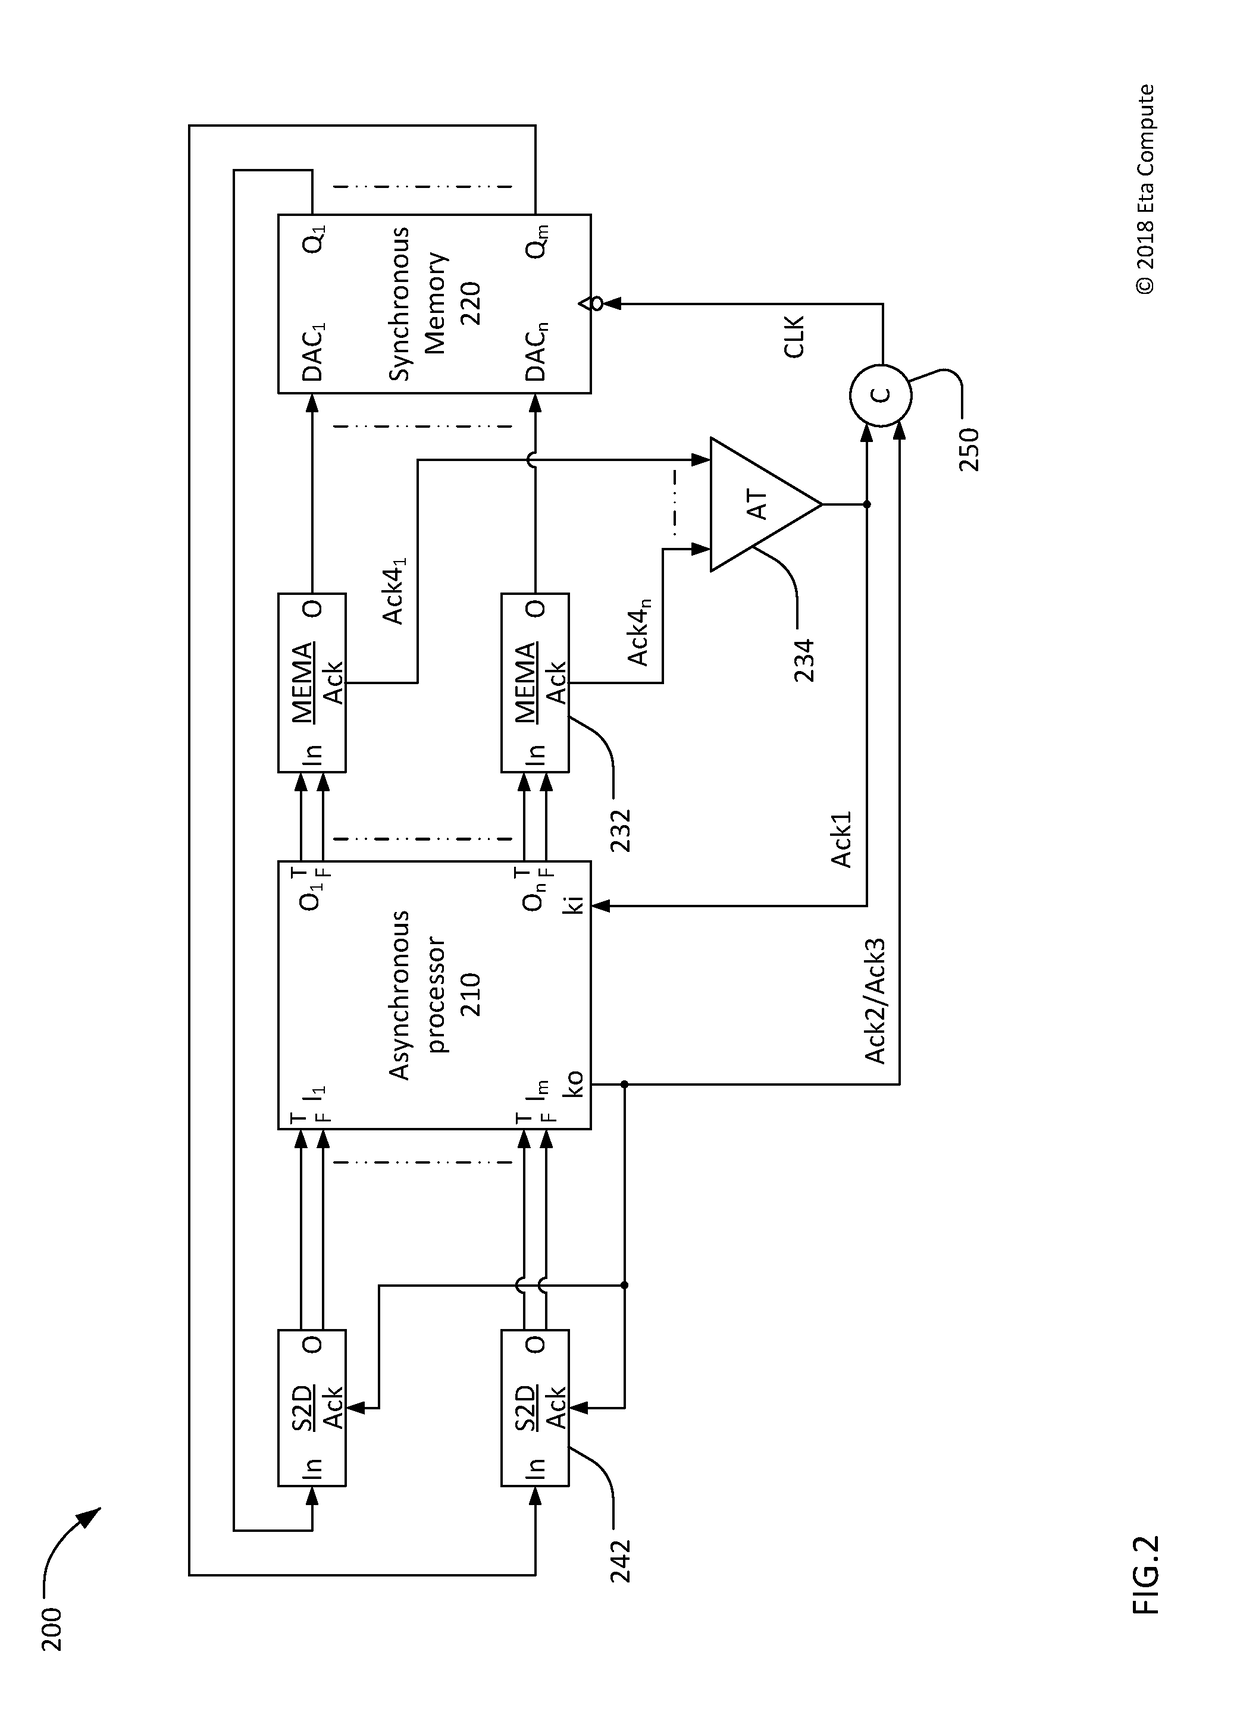 Interface from null convention logic to synchronous memory